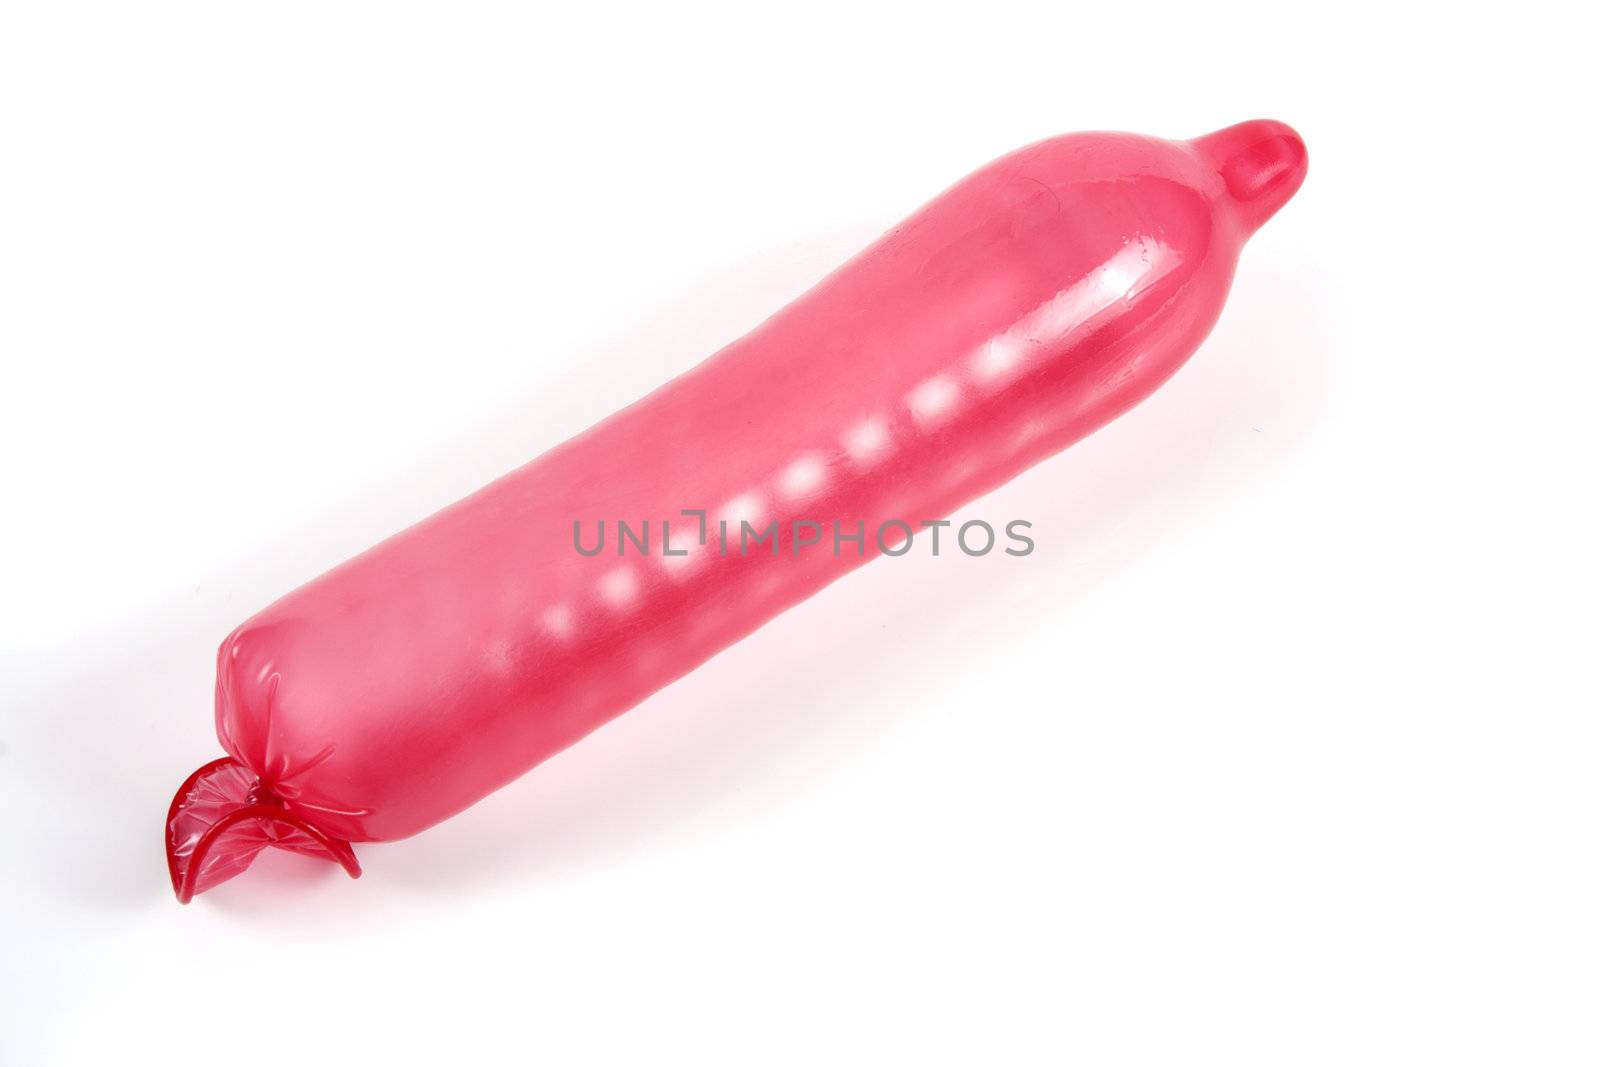 Condom on the white background